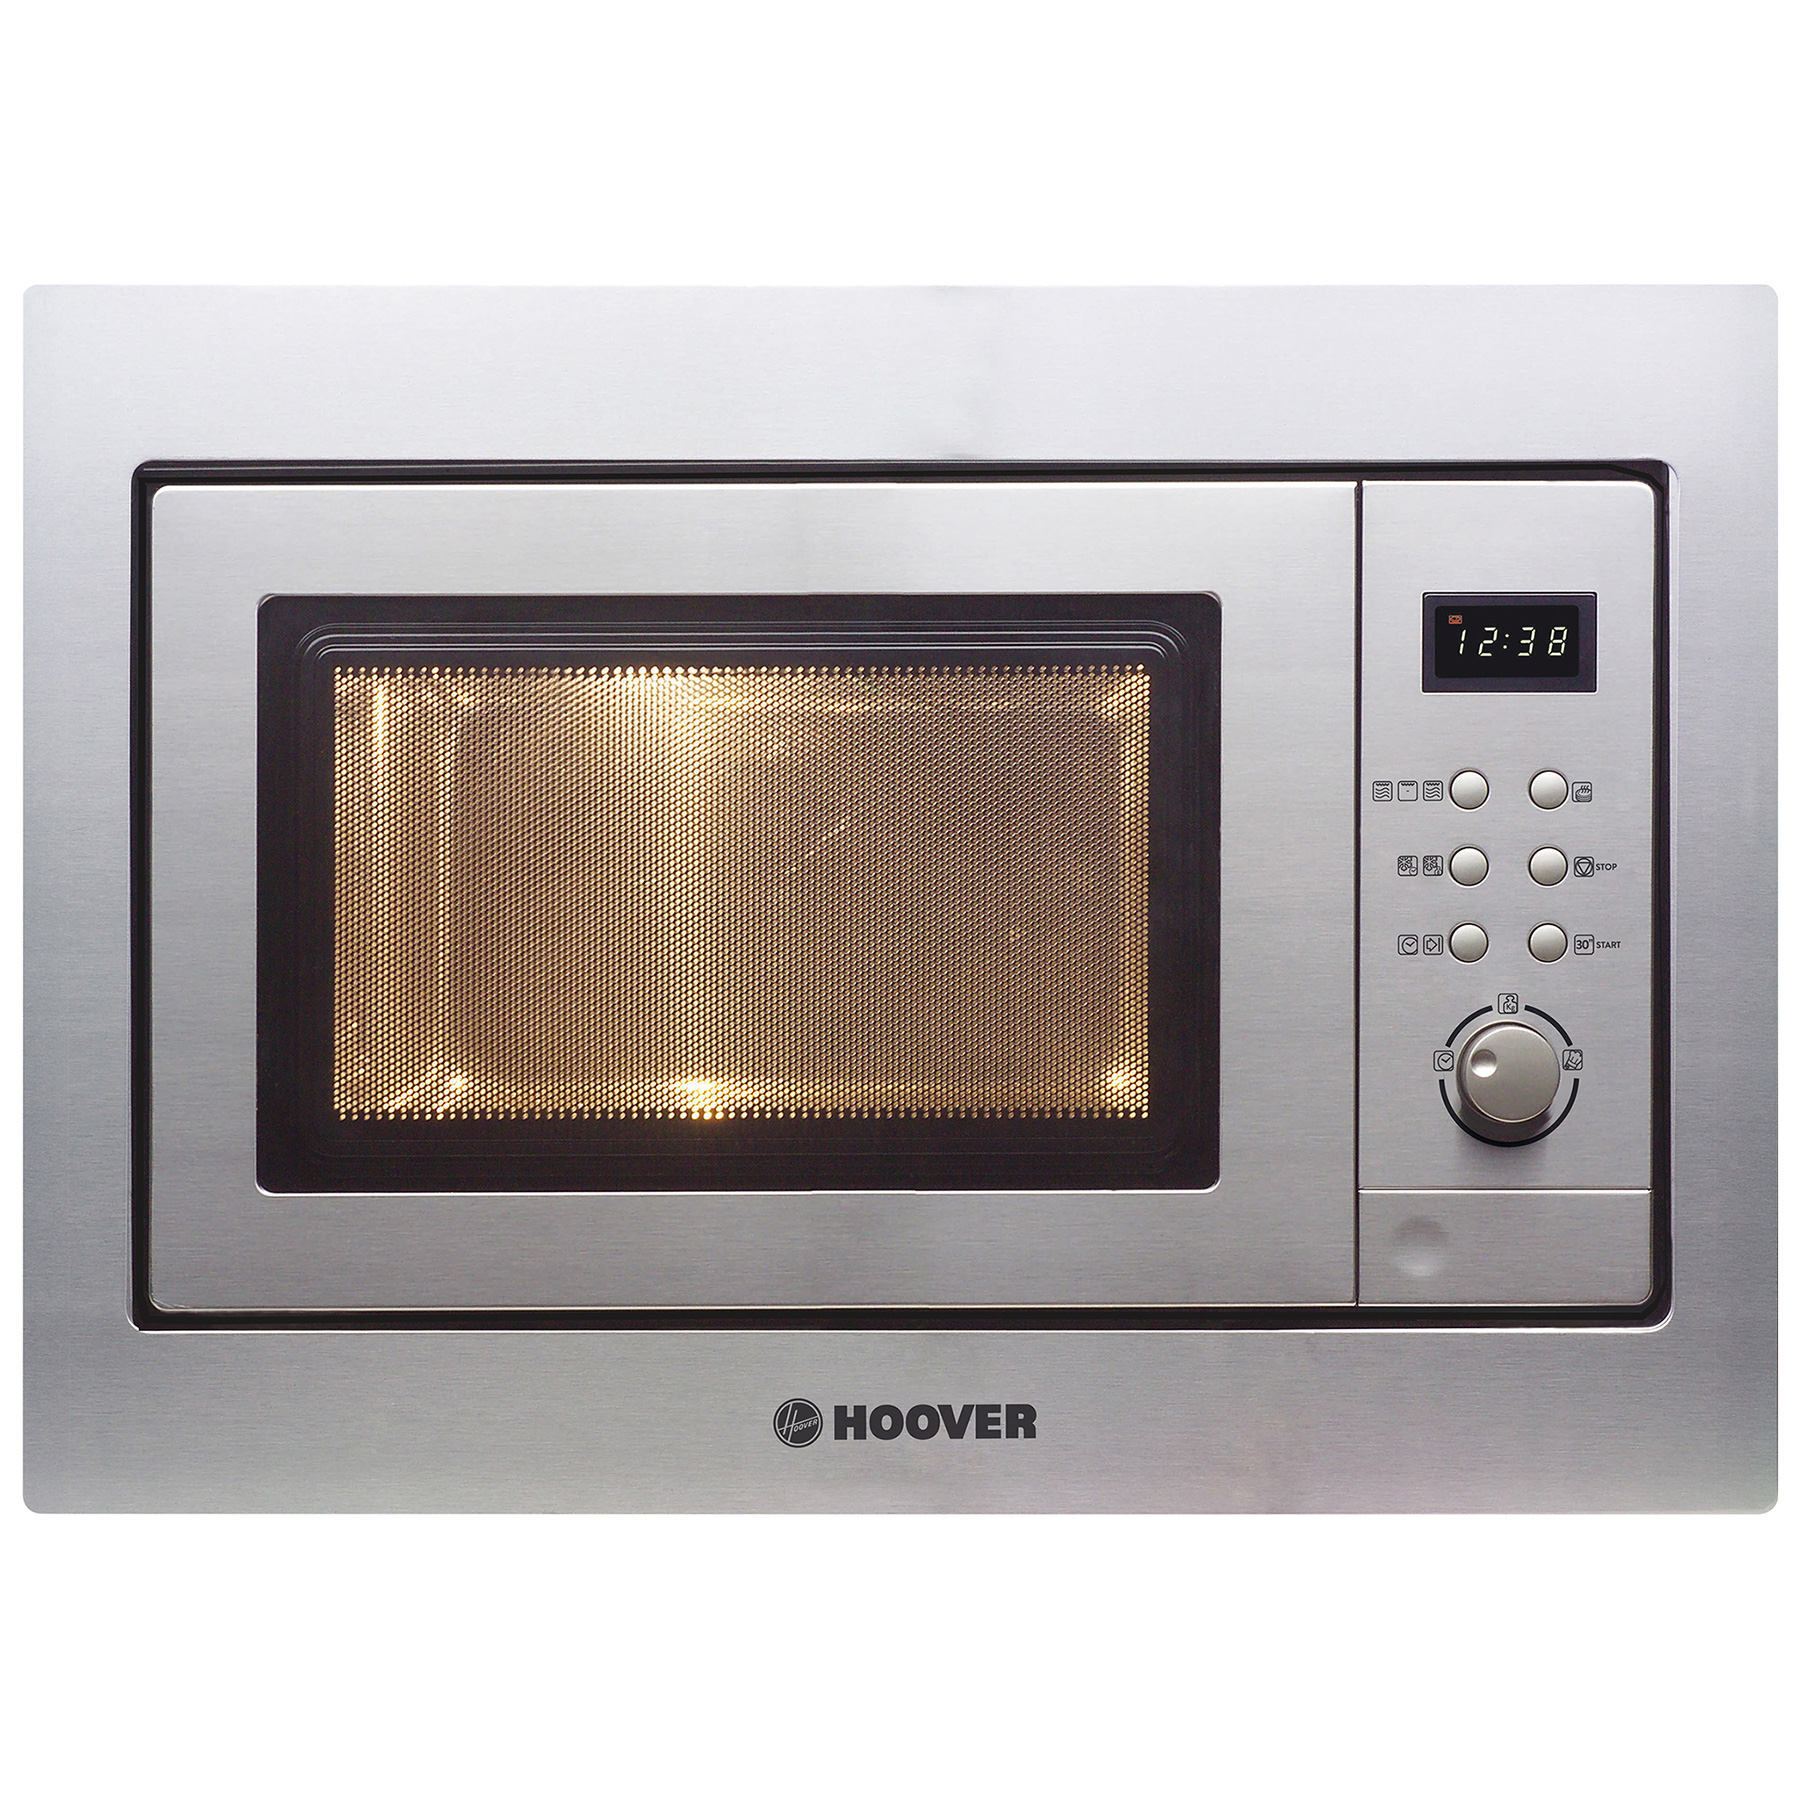 Hoover HMG201X Built In Microwave Oven Grill in St Steel 20L 800W